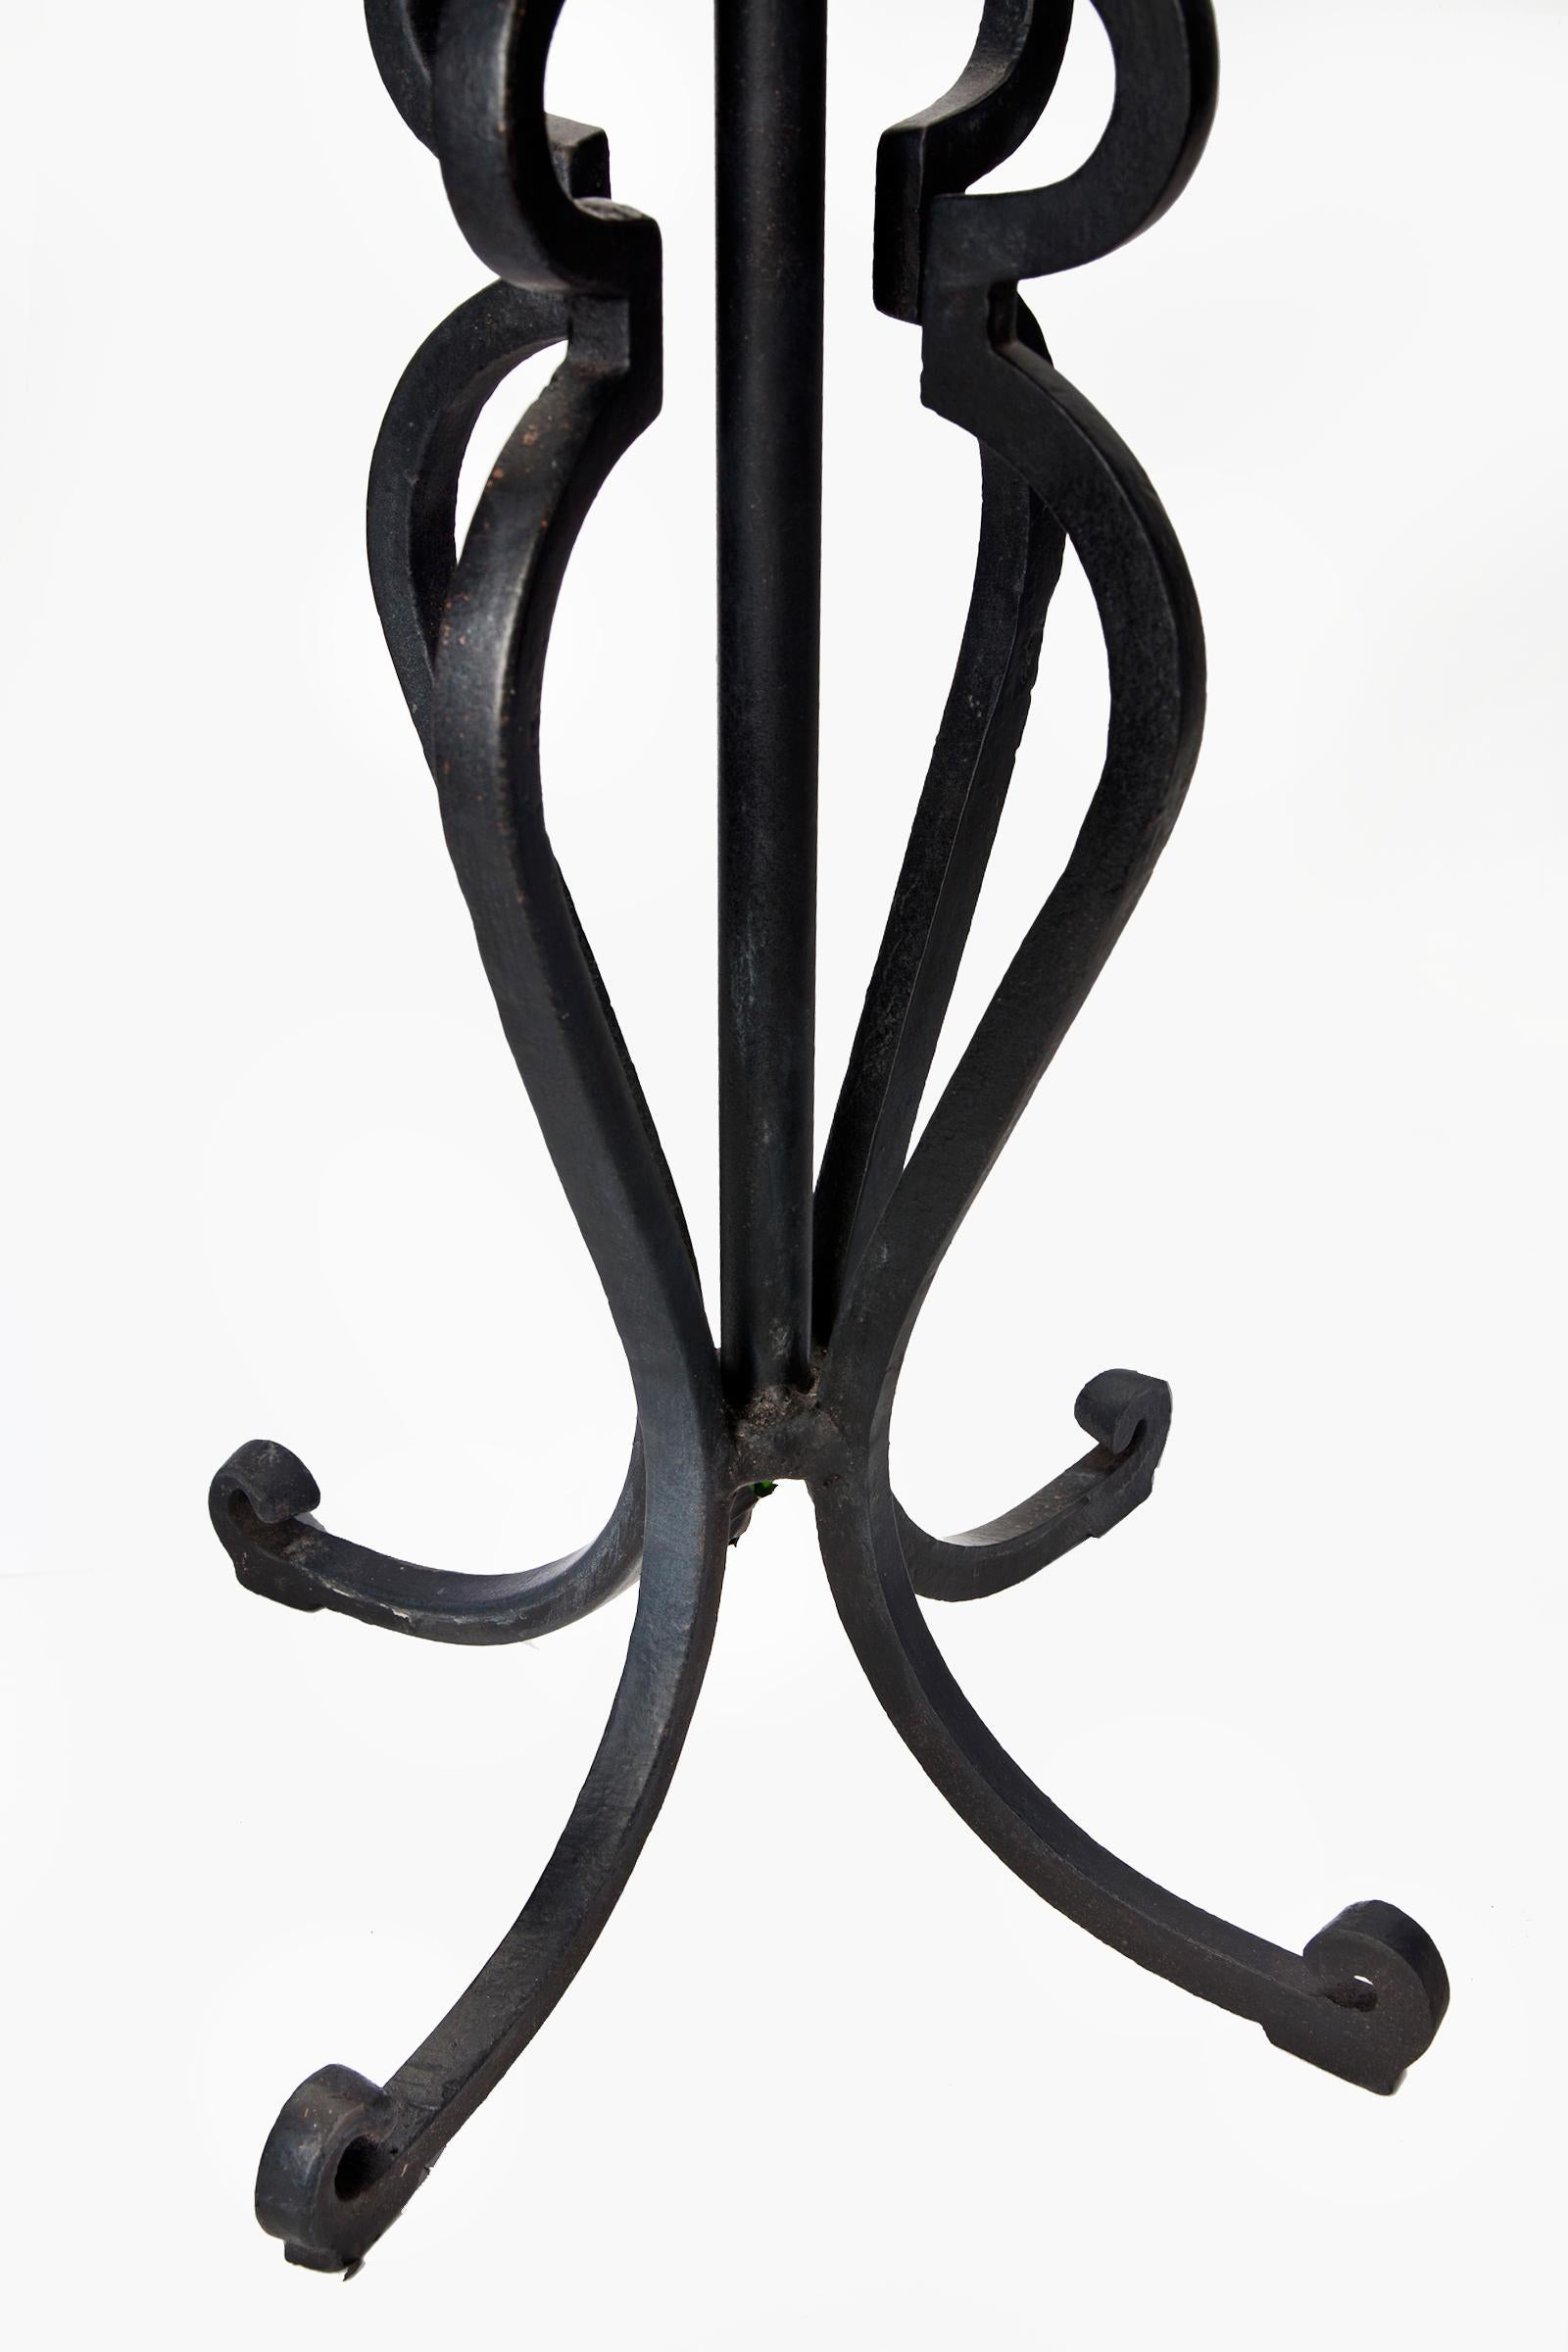 Wrought Iron Table Lamps, a pair In Good Condition For Sale In Malibu, CA